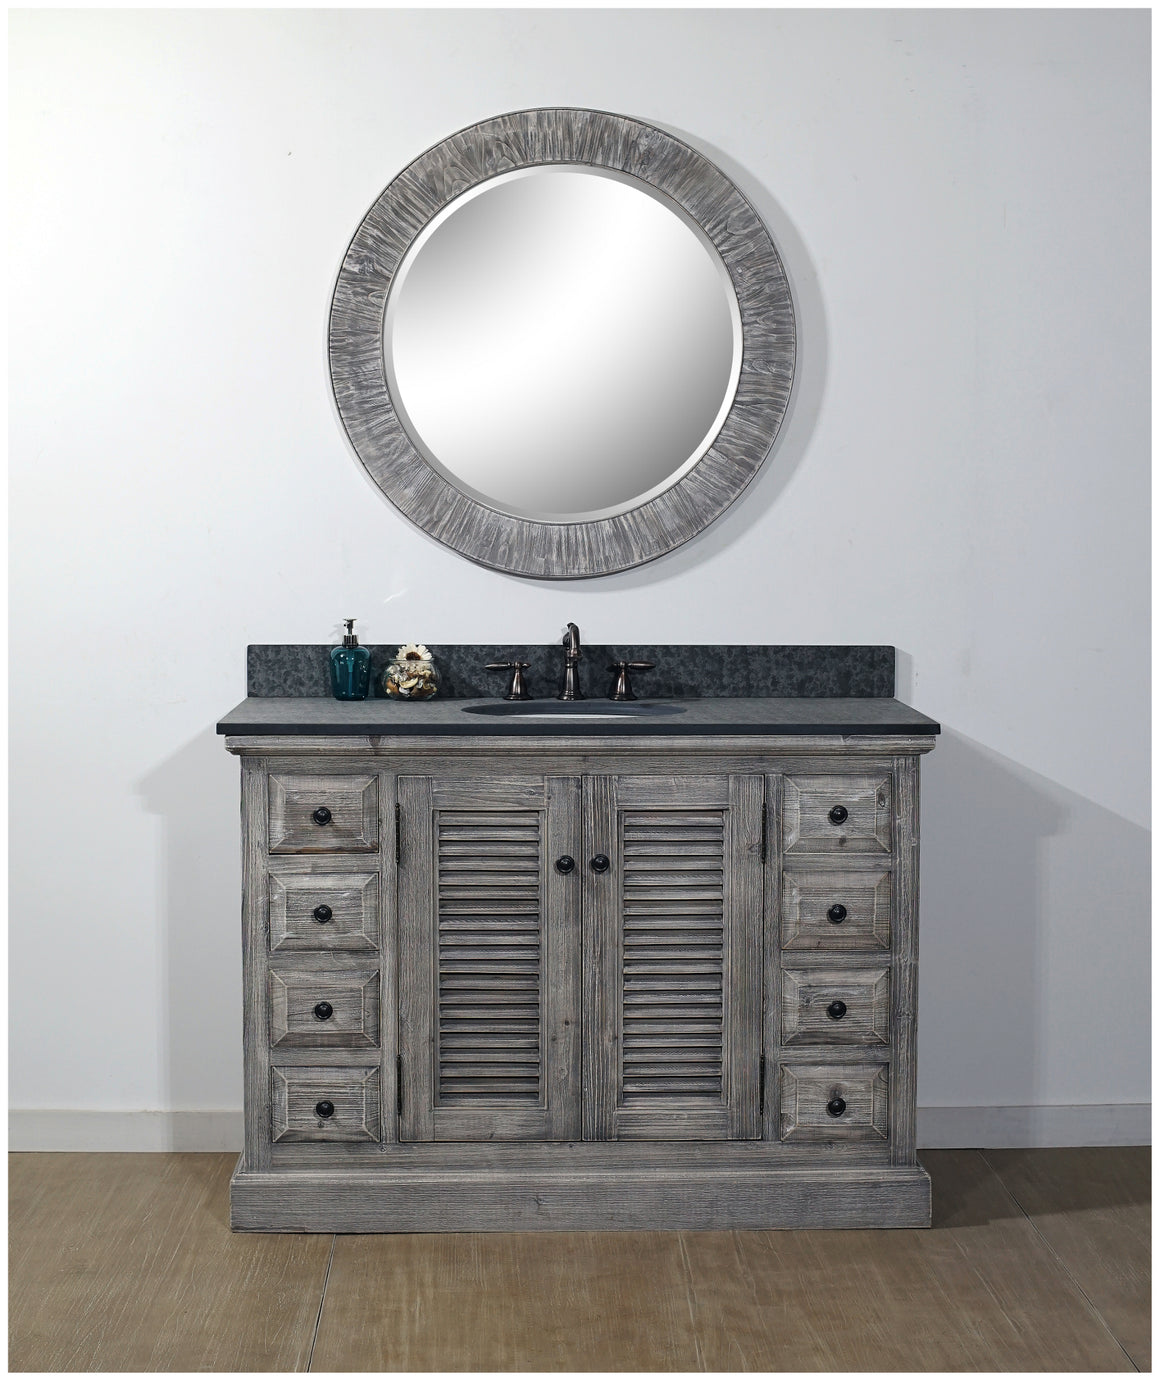 48" RUSTIC SOLID FIR SINGLE SINK VANITY IN GREY DRIFTWOOD WITH POLISHED TEXTURED SURFACE GRANITE TOP-NO FAUCET